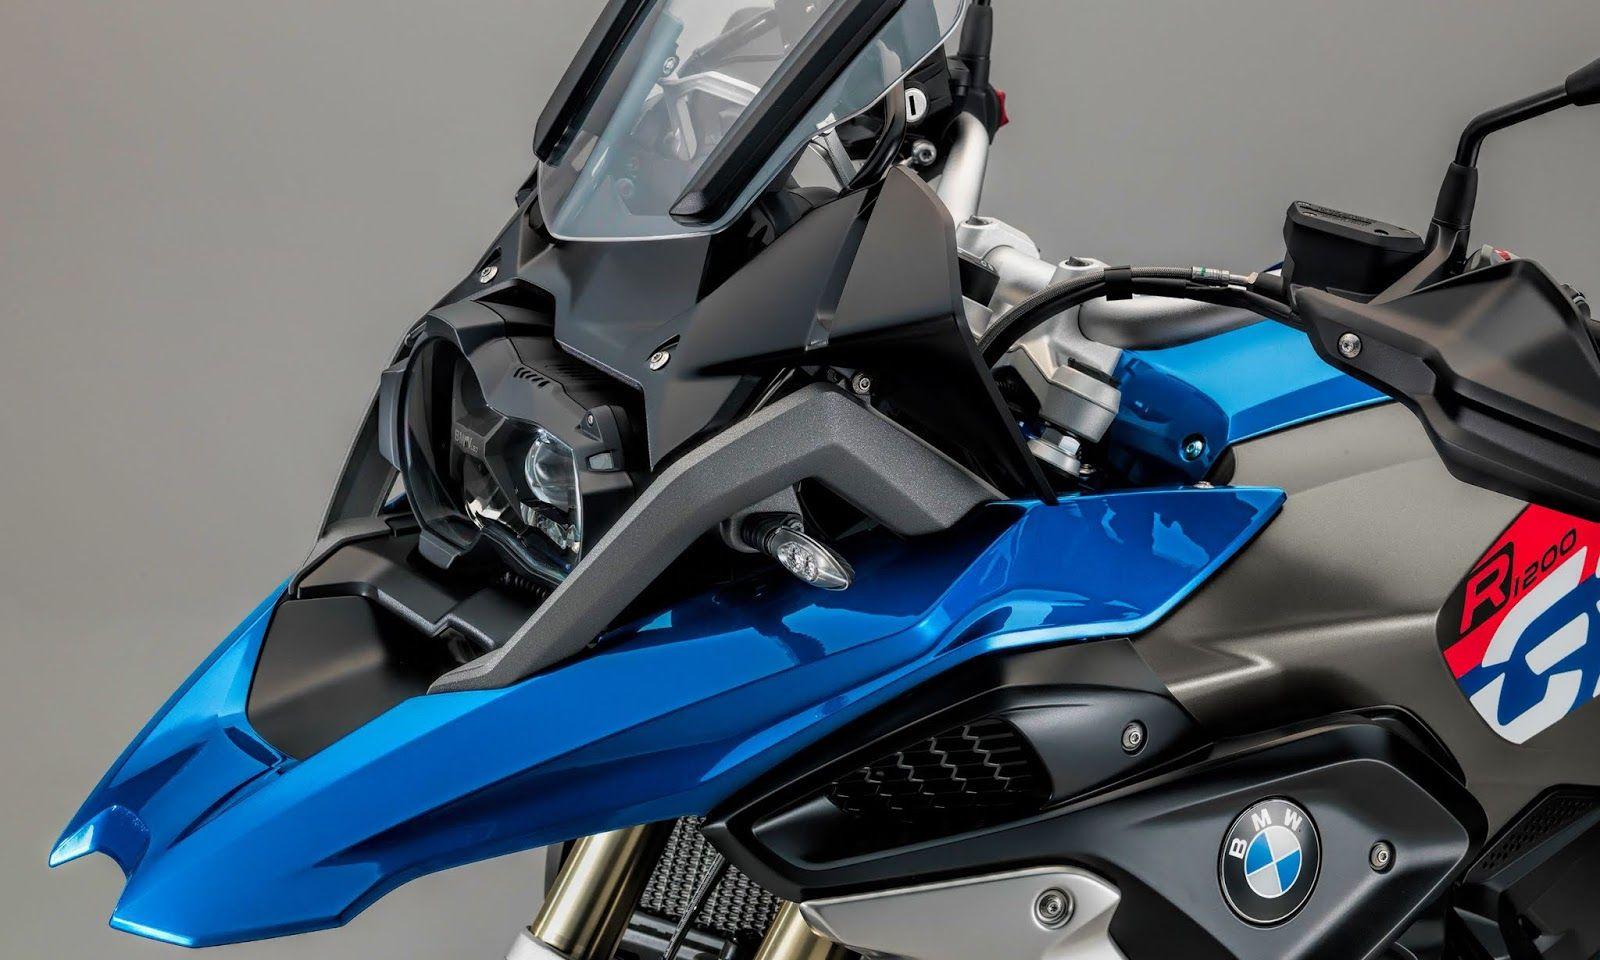 BMW GS 1200 HD Wallpaper free download. This BMW Bikes R 1200GS are